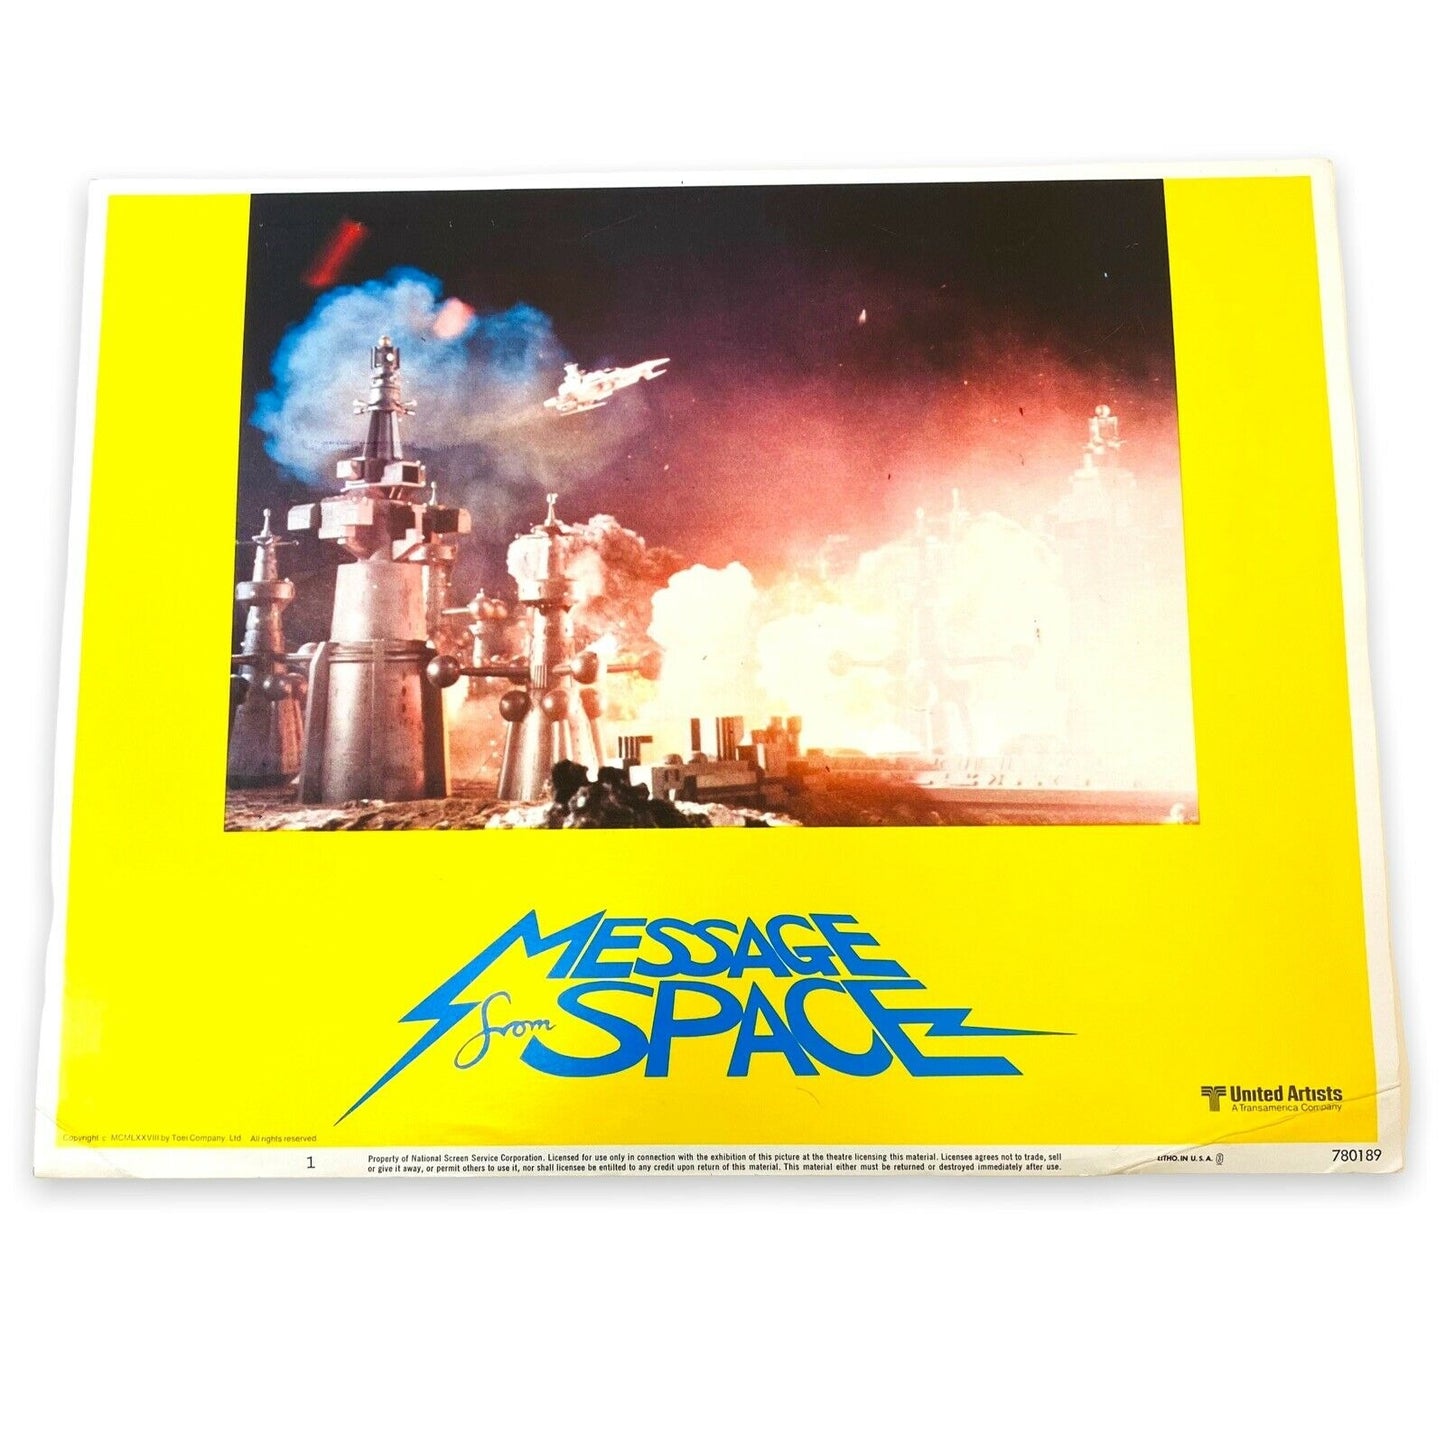 Message From Space ORIGINAL Theater Lobby Card 1 Sci Fi Movie Poster 1978